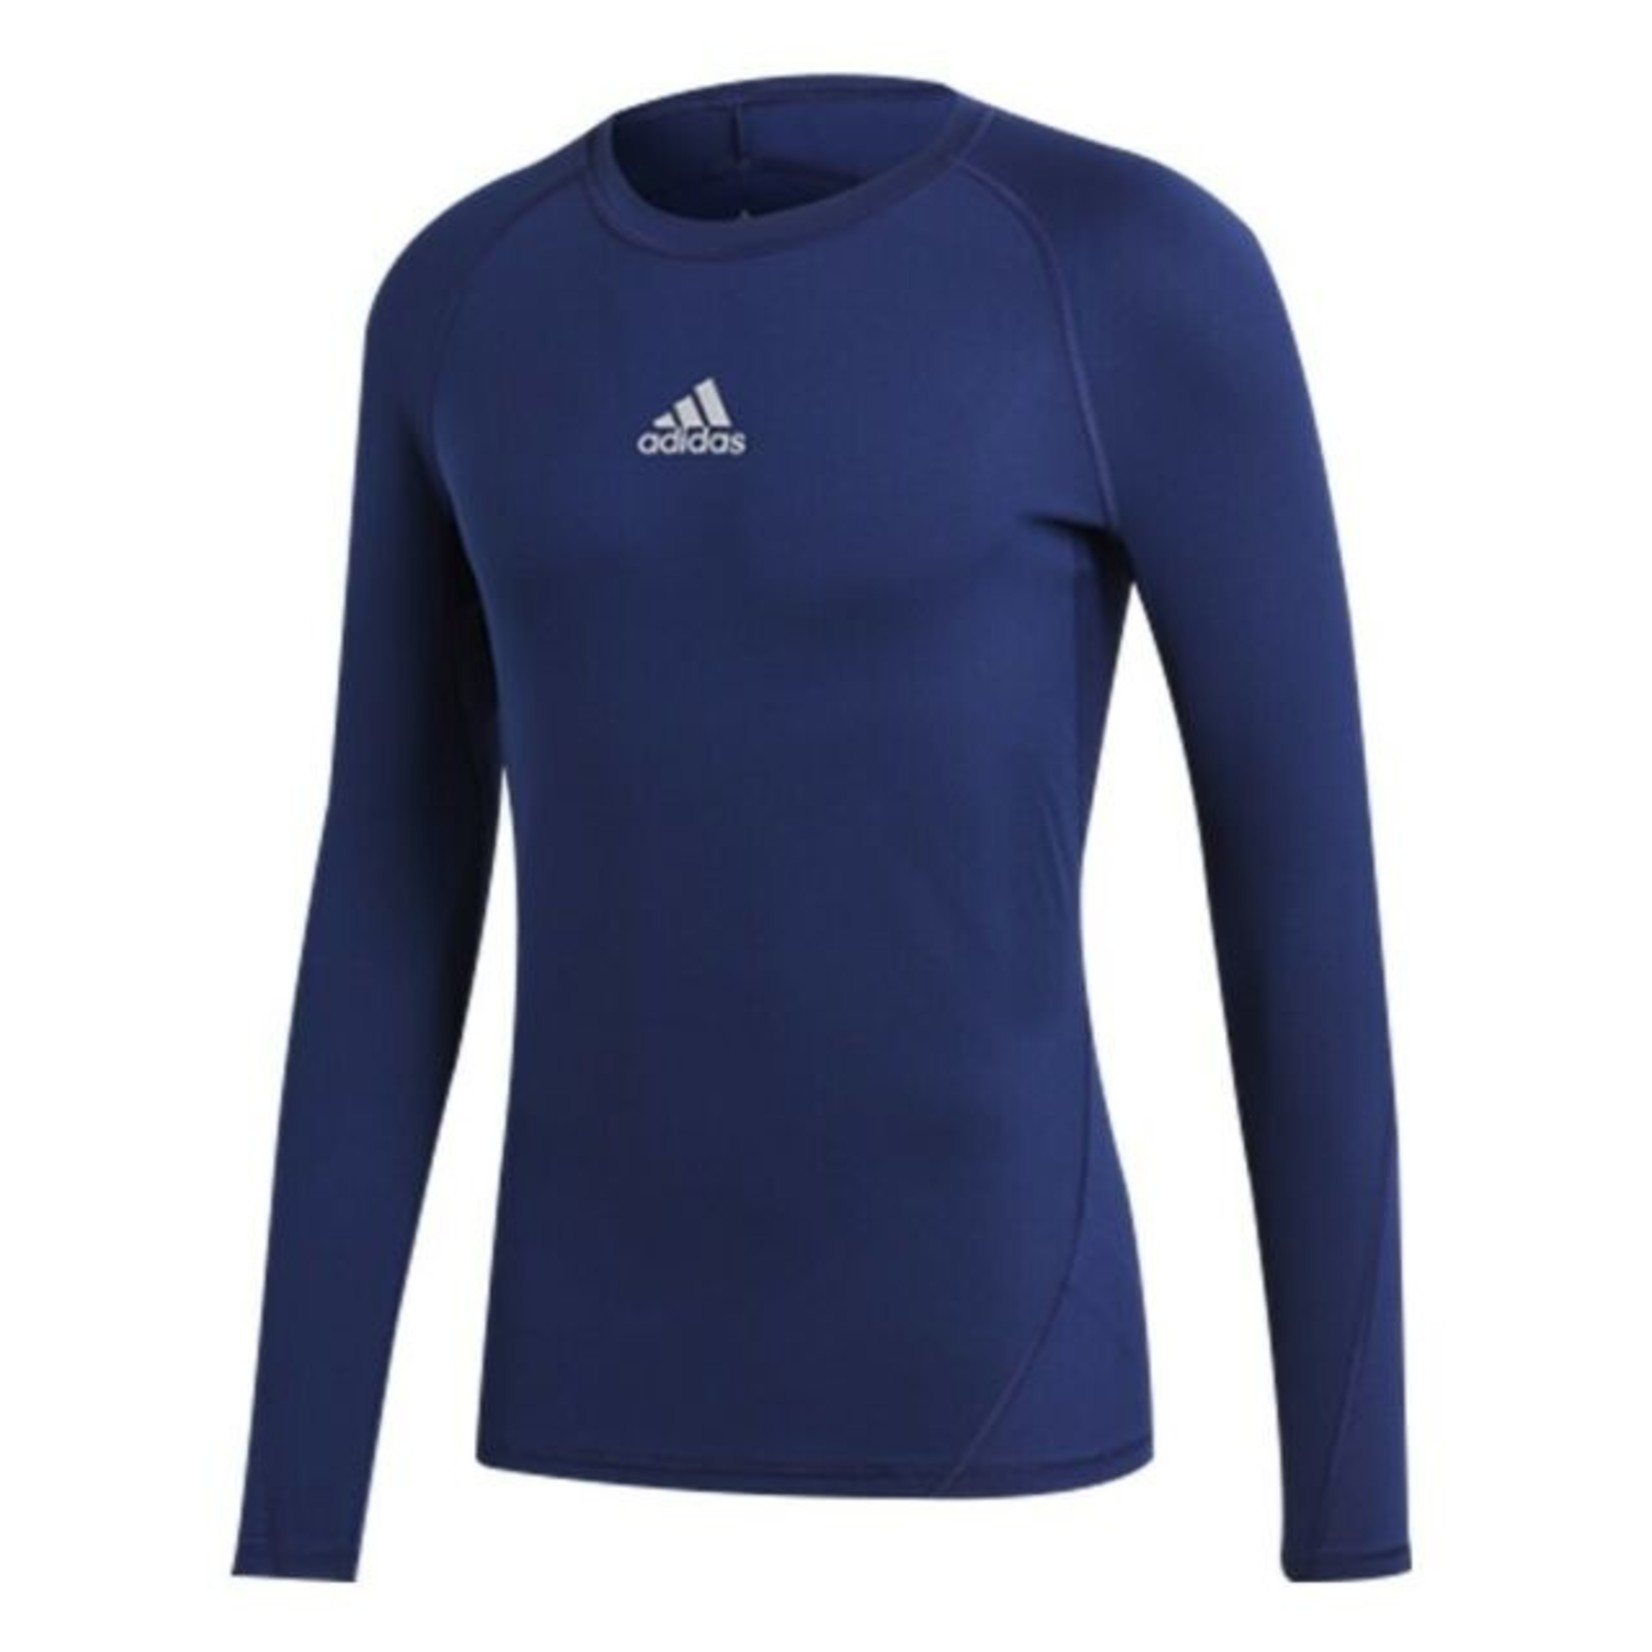 Adidas Compression Navy Long Sleeve Youth